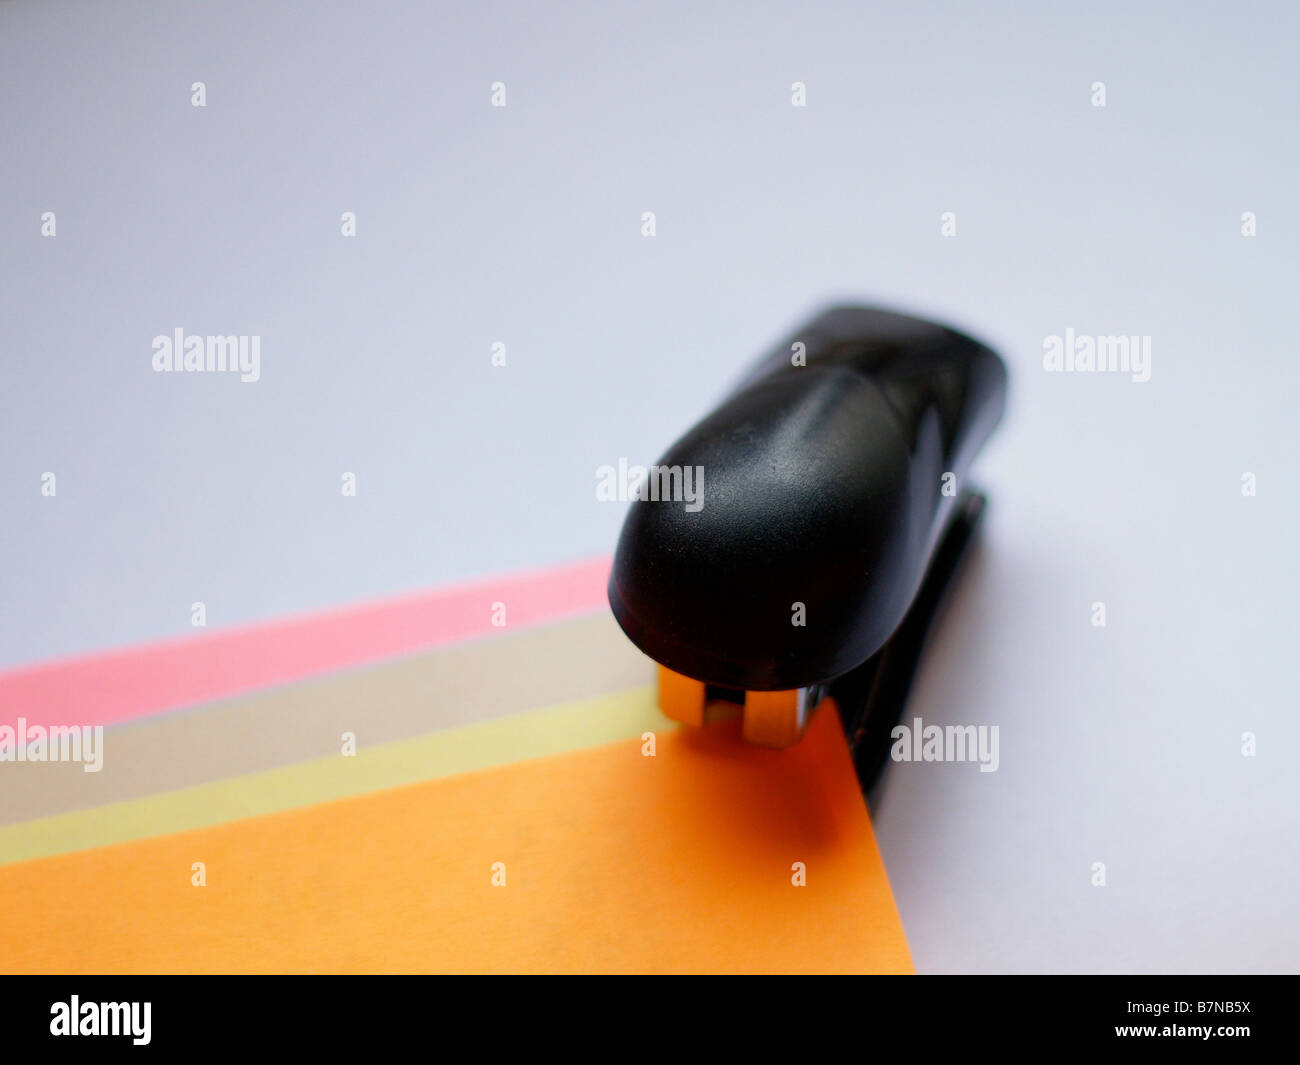 Small stapler about to staple multi-colored sheets of paper in earth tones, shallow focus, isolated background. Stock Photo